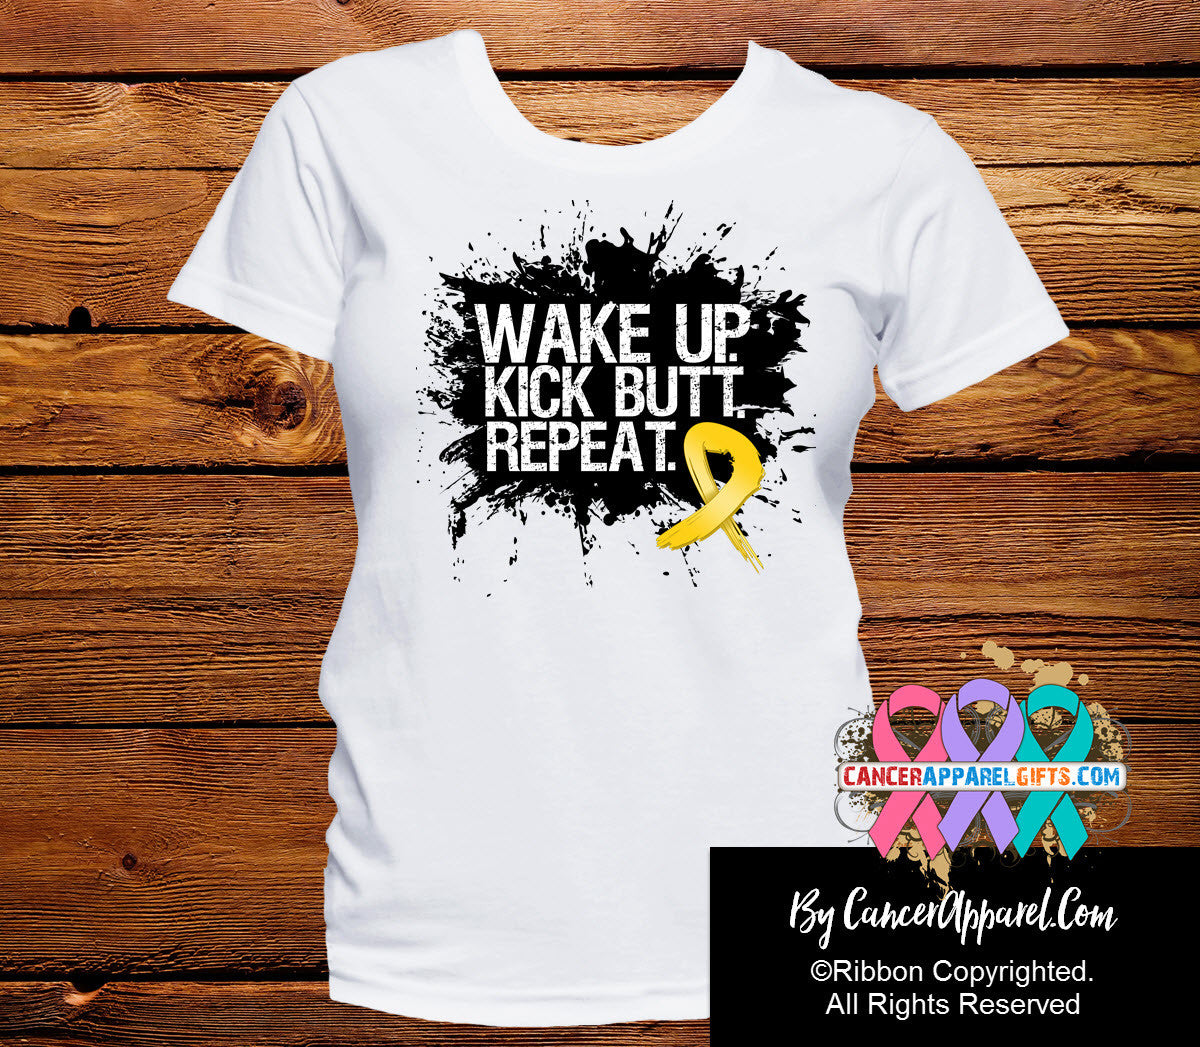 Childhood Cancer Shirts Wake Up Kick Butt and Repeat - Cancer Apparel and Gifts